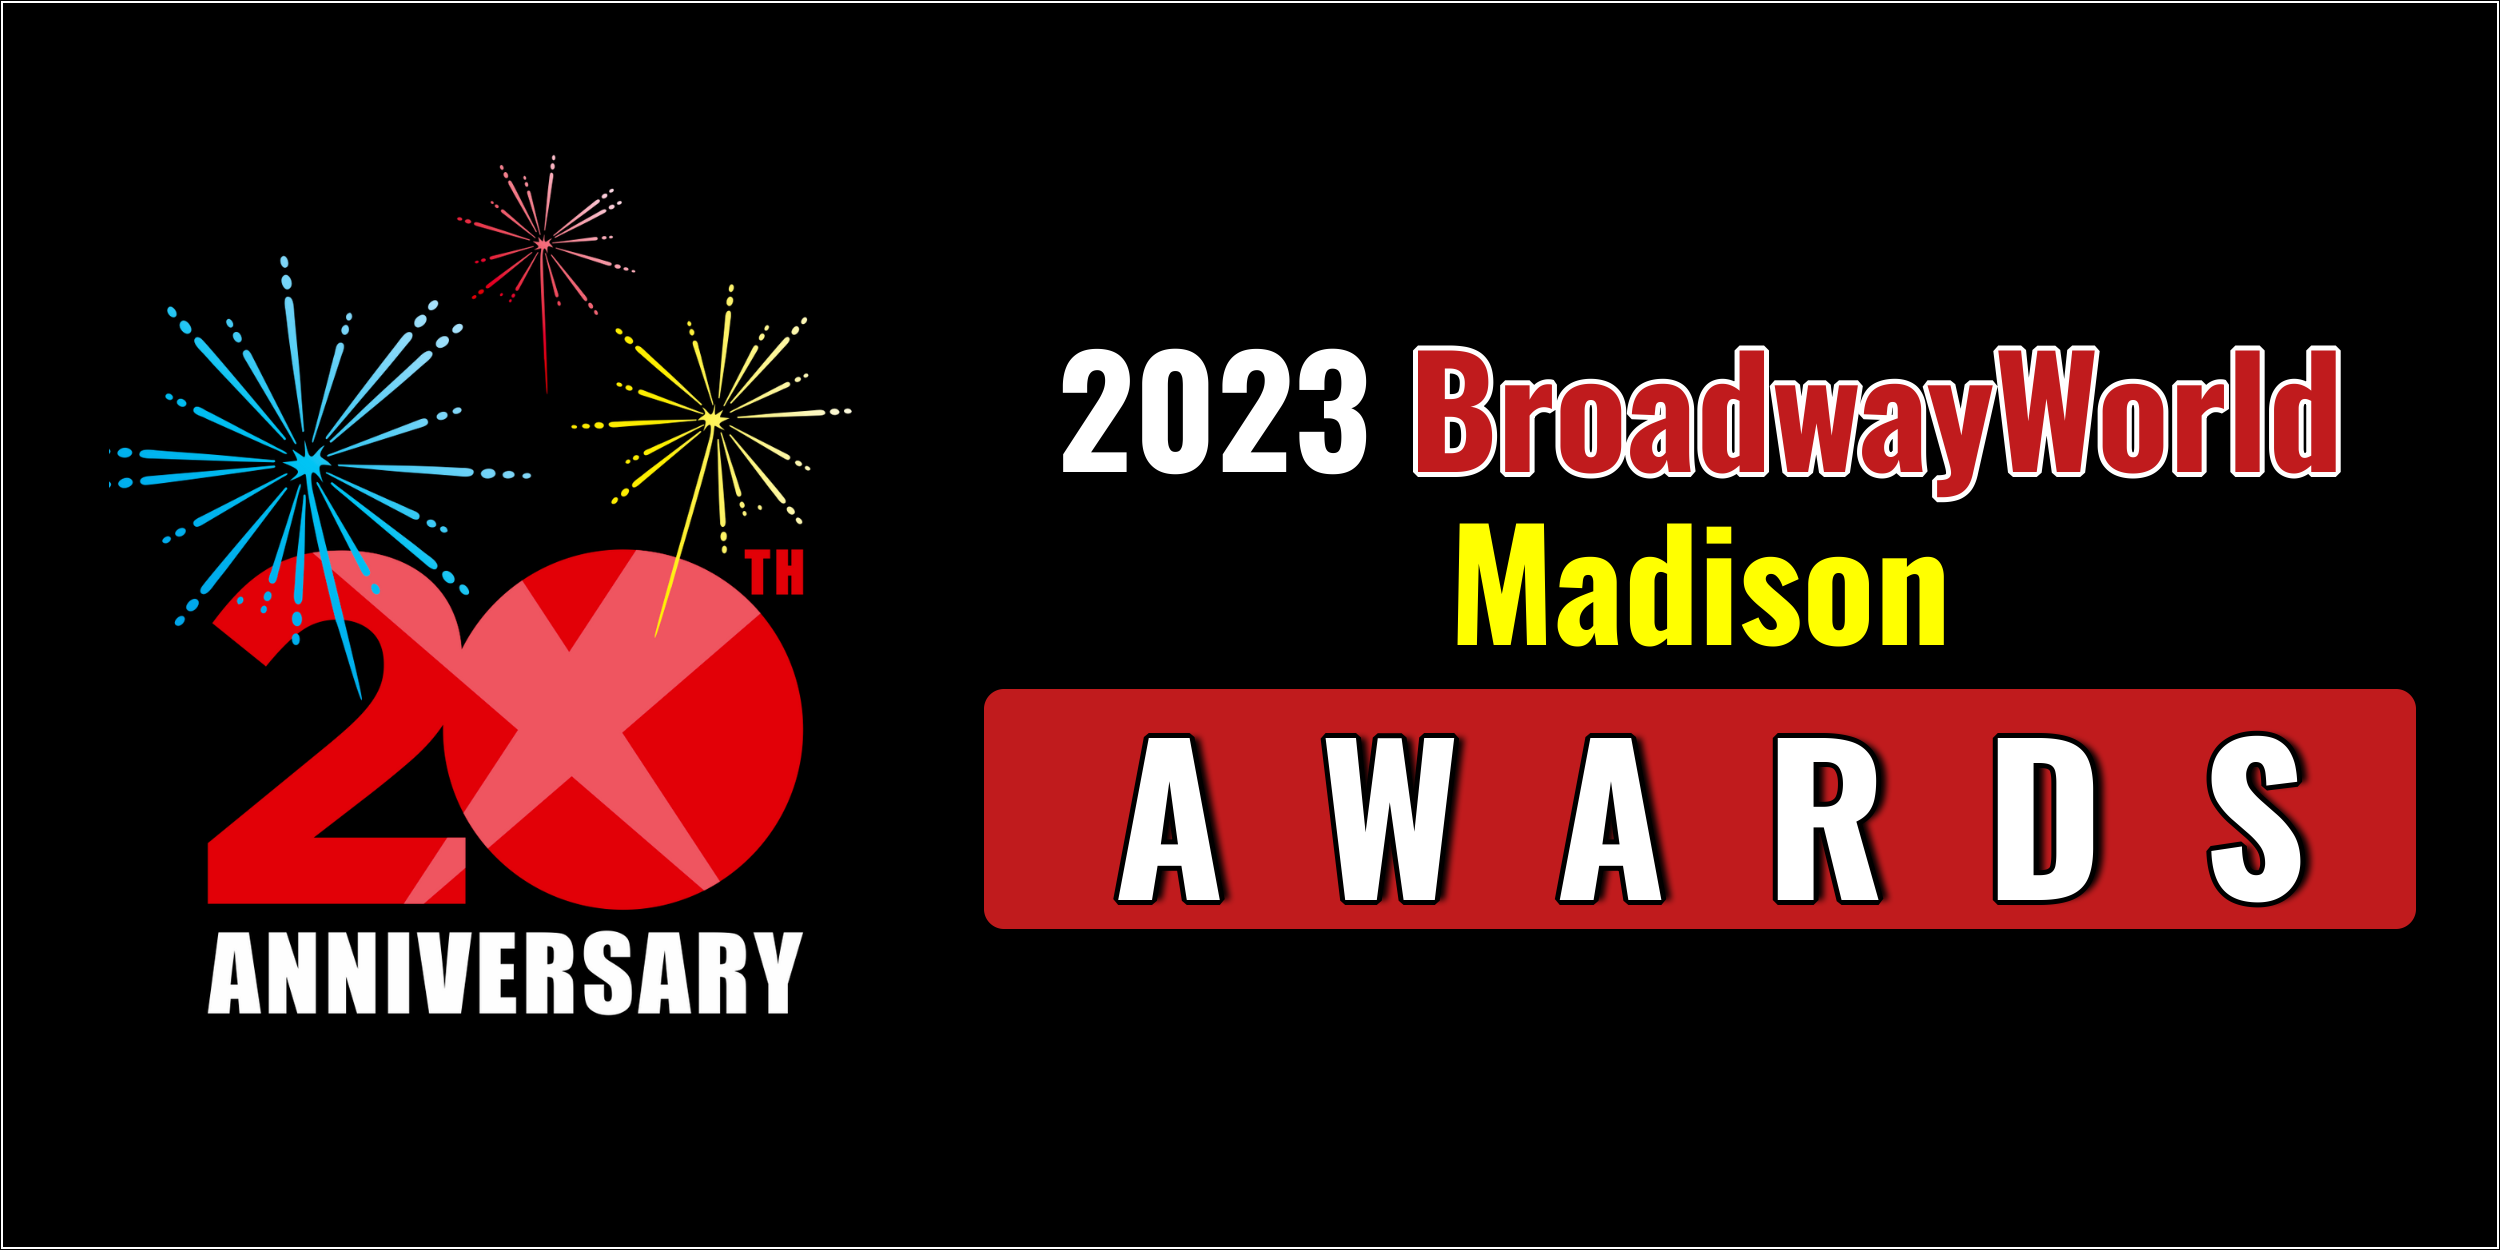 Latest Standings Announced For The 2023 BroadwayWorld Madison Awards; THE 39 STEPS Leads Best Play! 